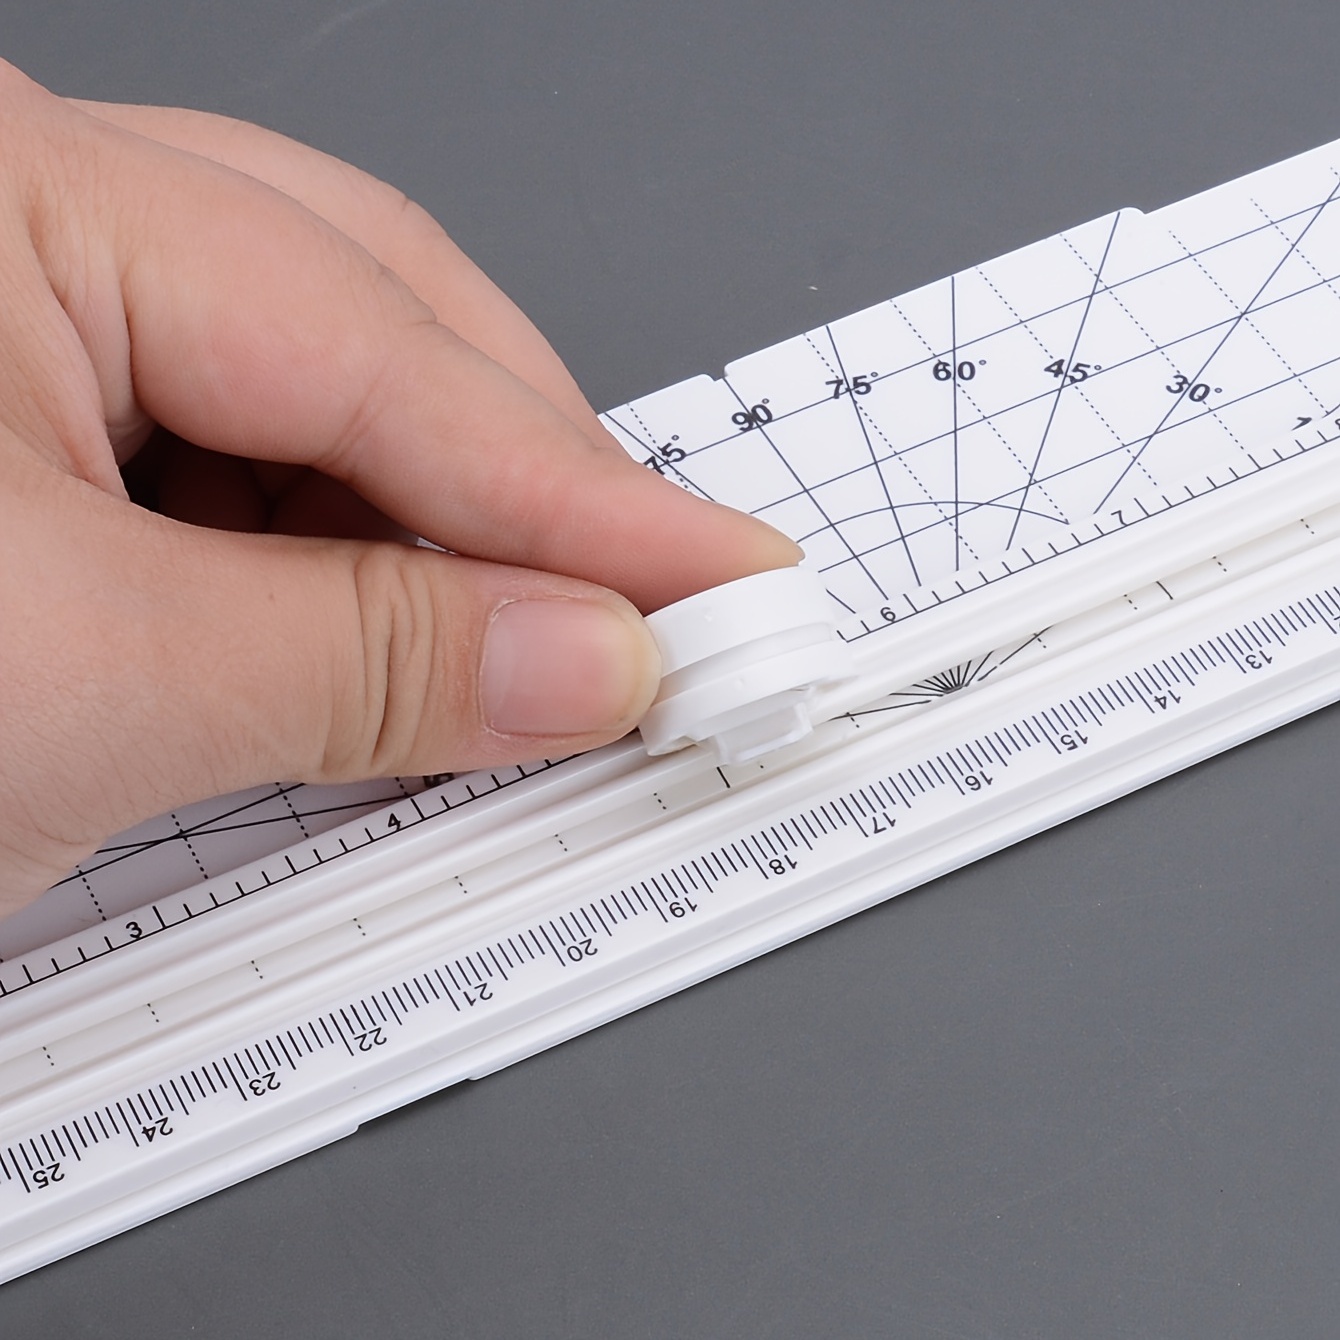 Mini A4 Paper Cutter with Replacement Blades — A Lot Mall